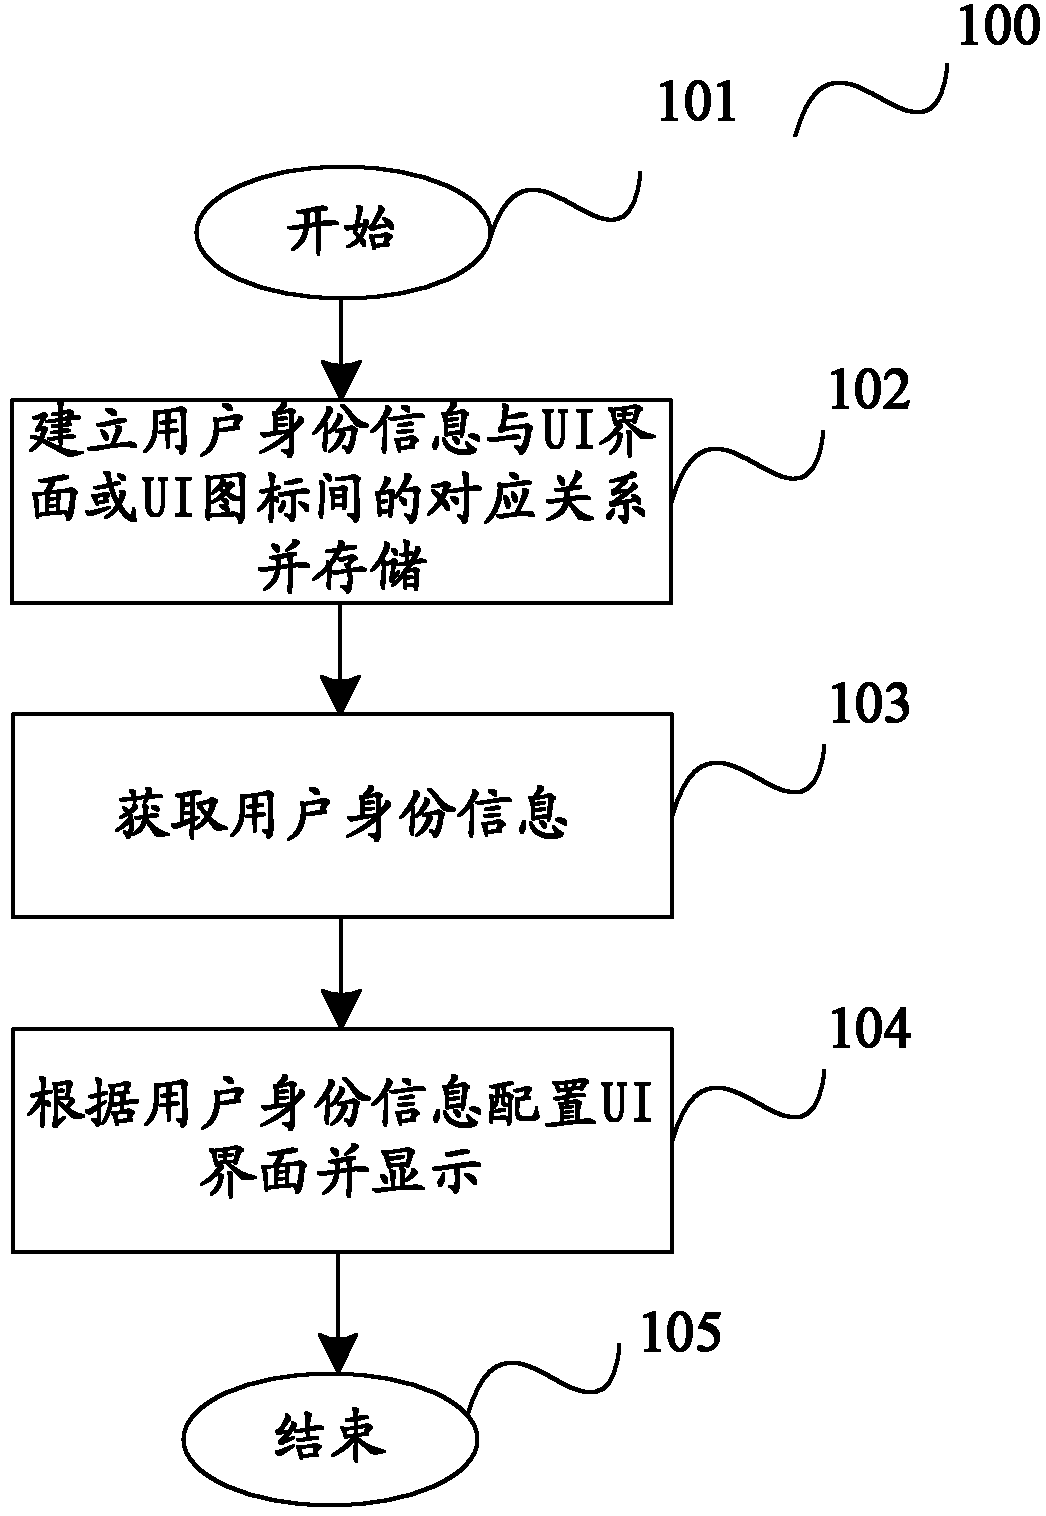 Method for allocating user interface of terminal equipment and terminal equipment